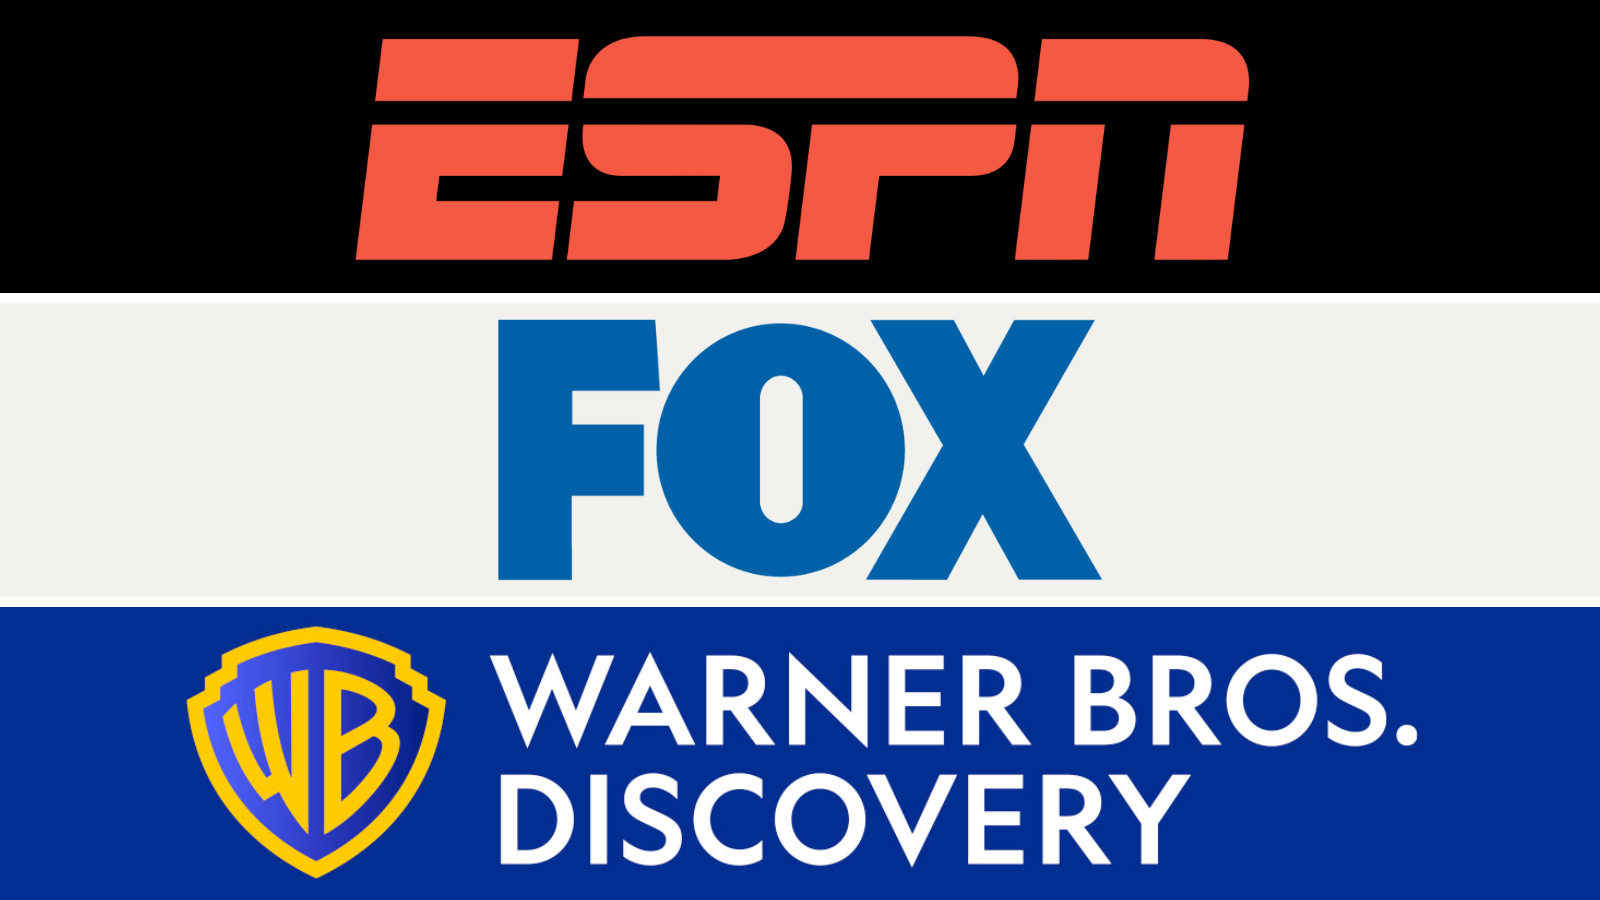 The ESPN, FOX, and Warner Bros. Discovery logos.